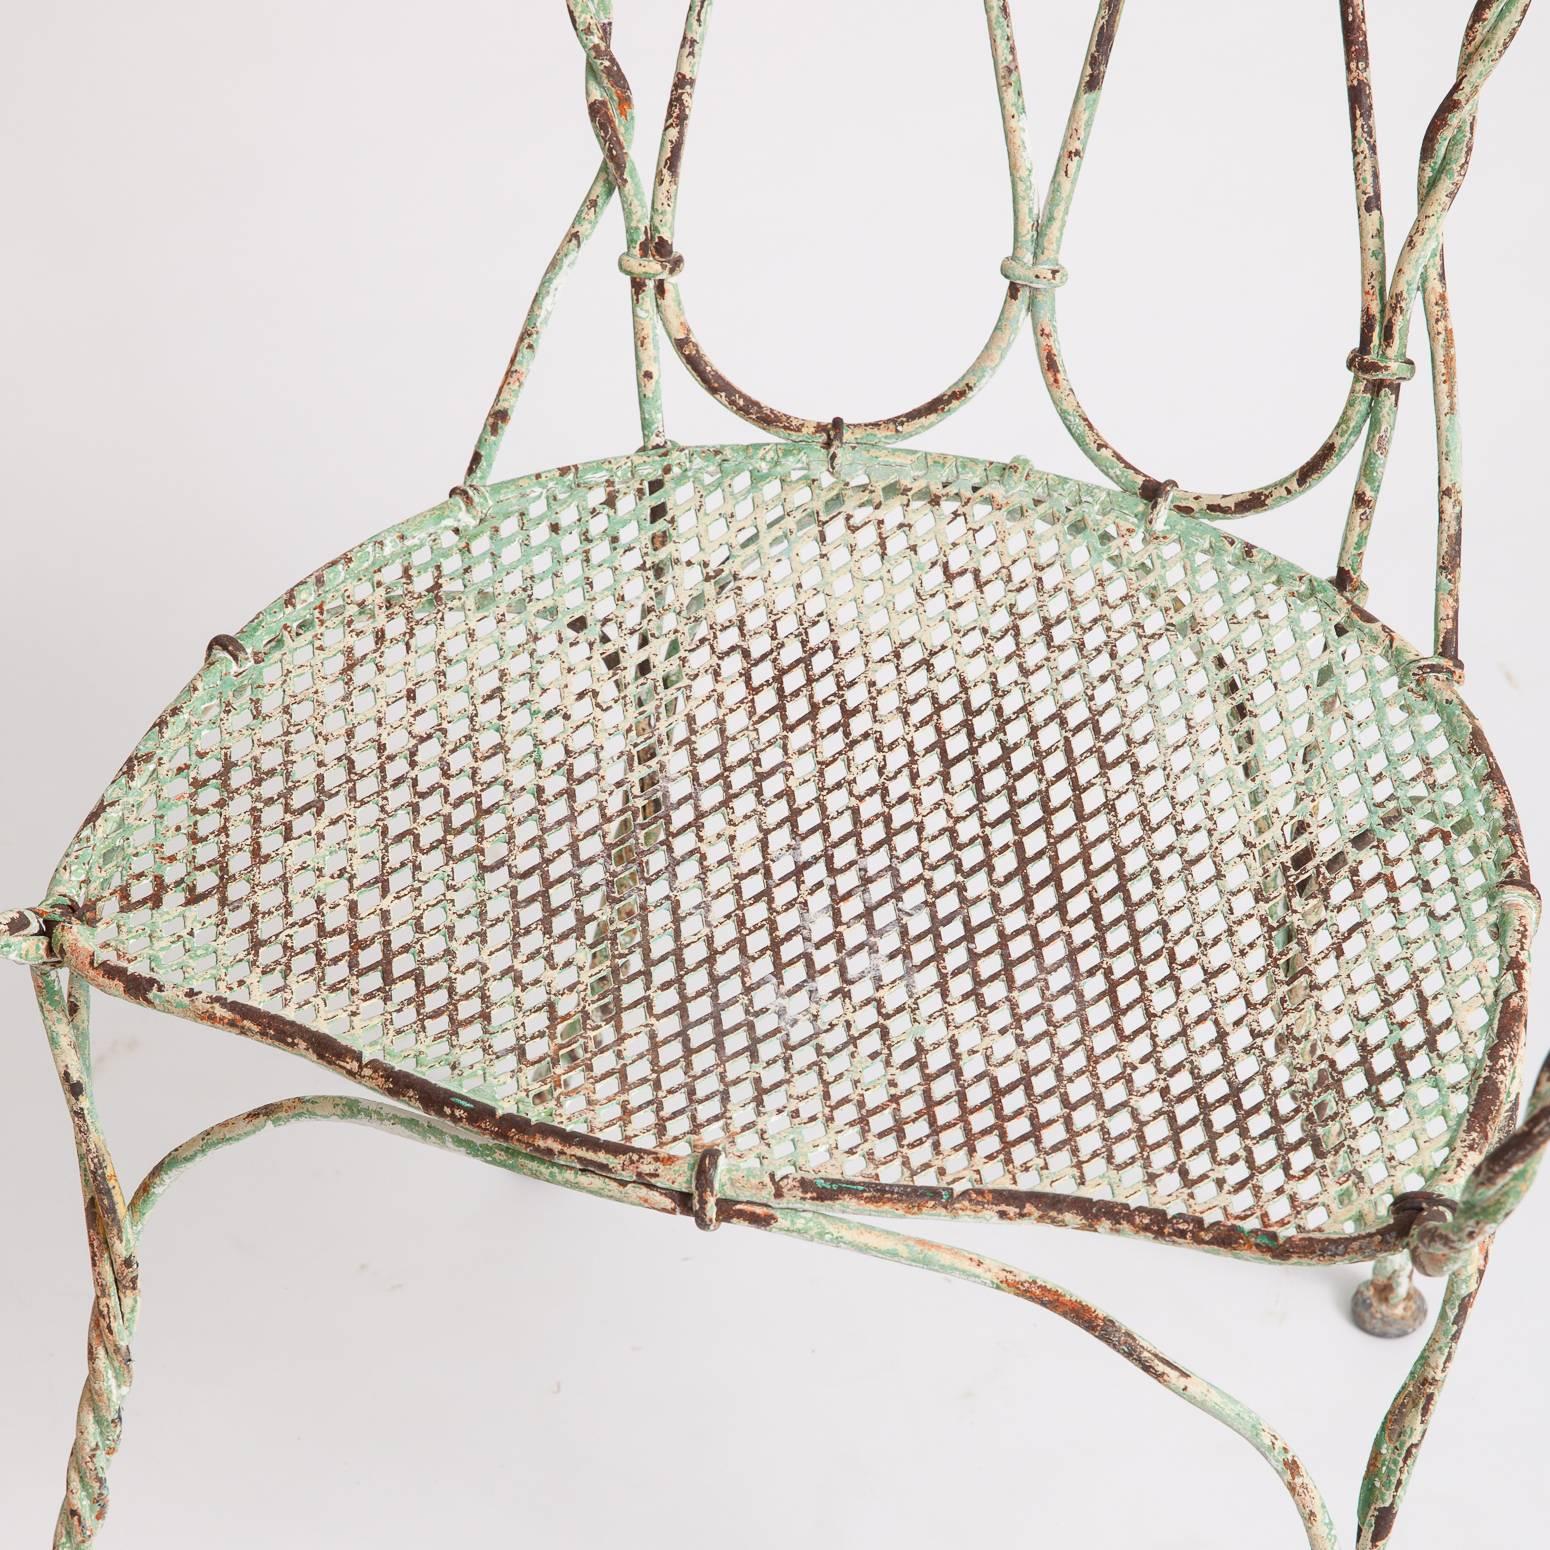 This pair of very early and rare French wrought iron garden armchairs have braided rope construction on the back and legs and mesh seats which are in very good condition. The slightly slanted backs allow for very comfortable seating. The light green